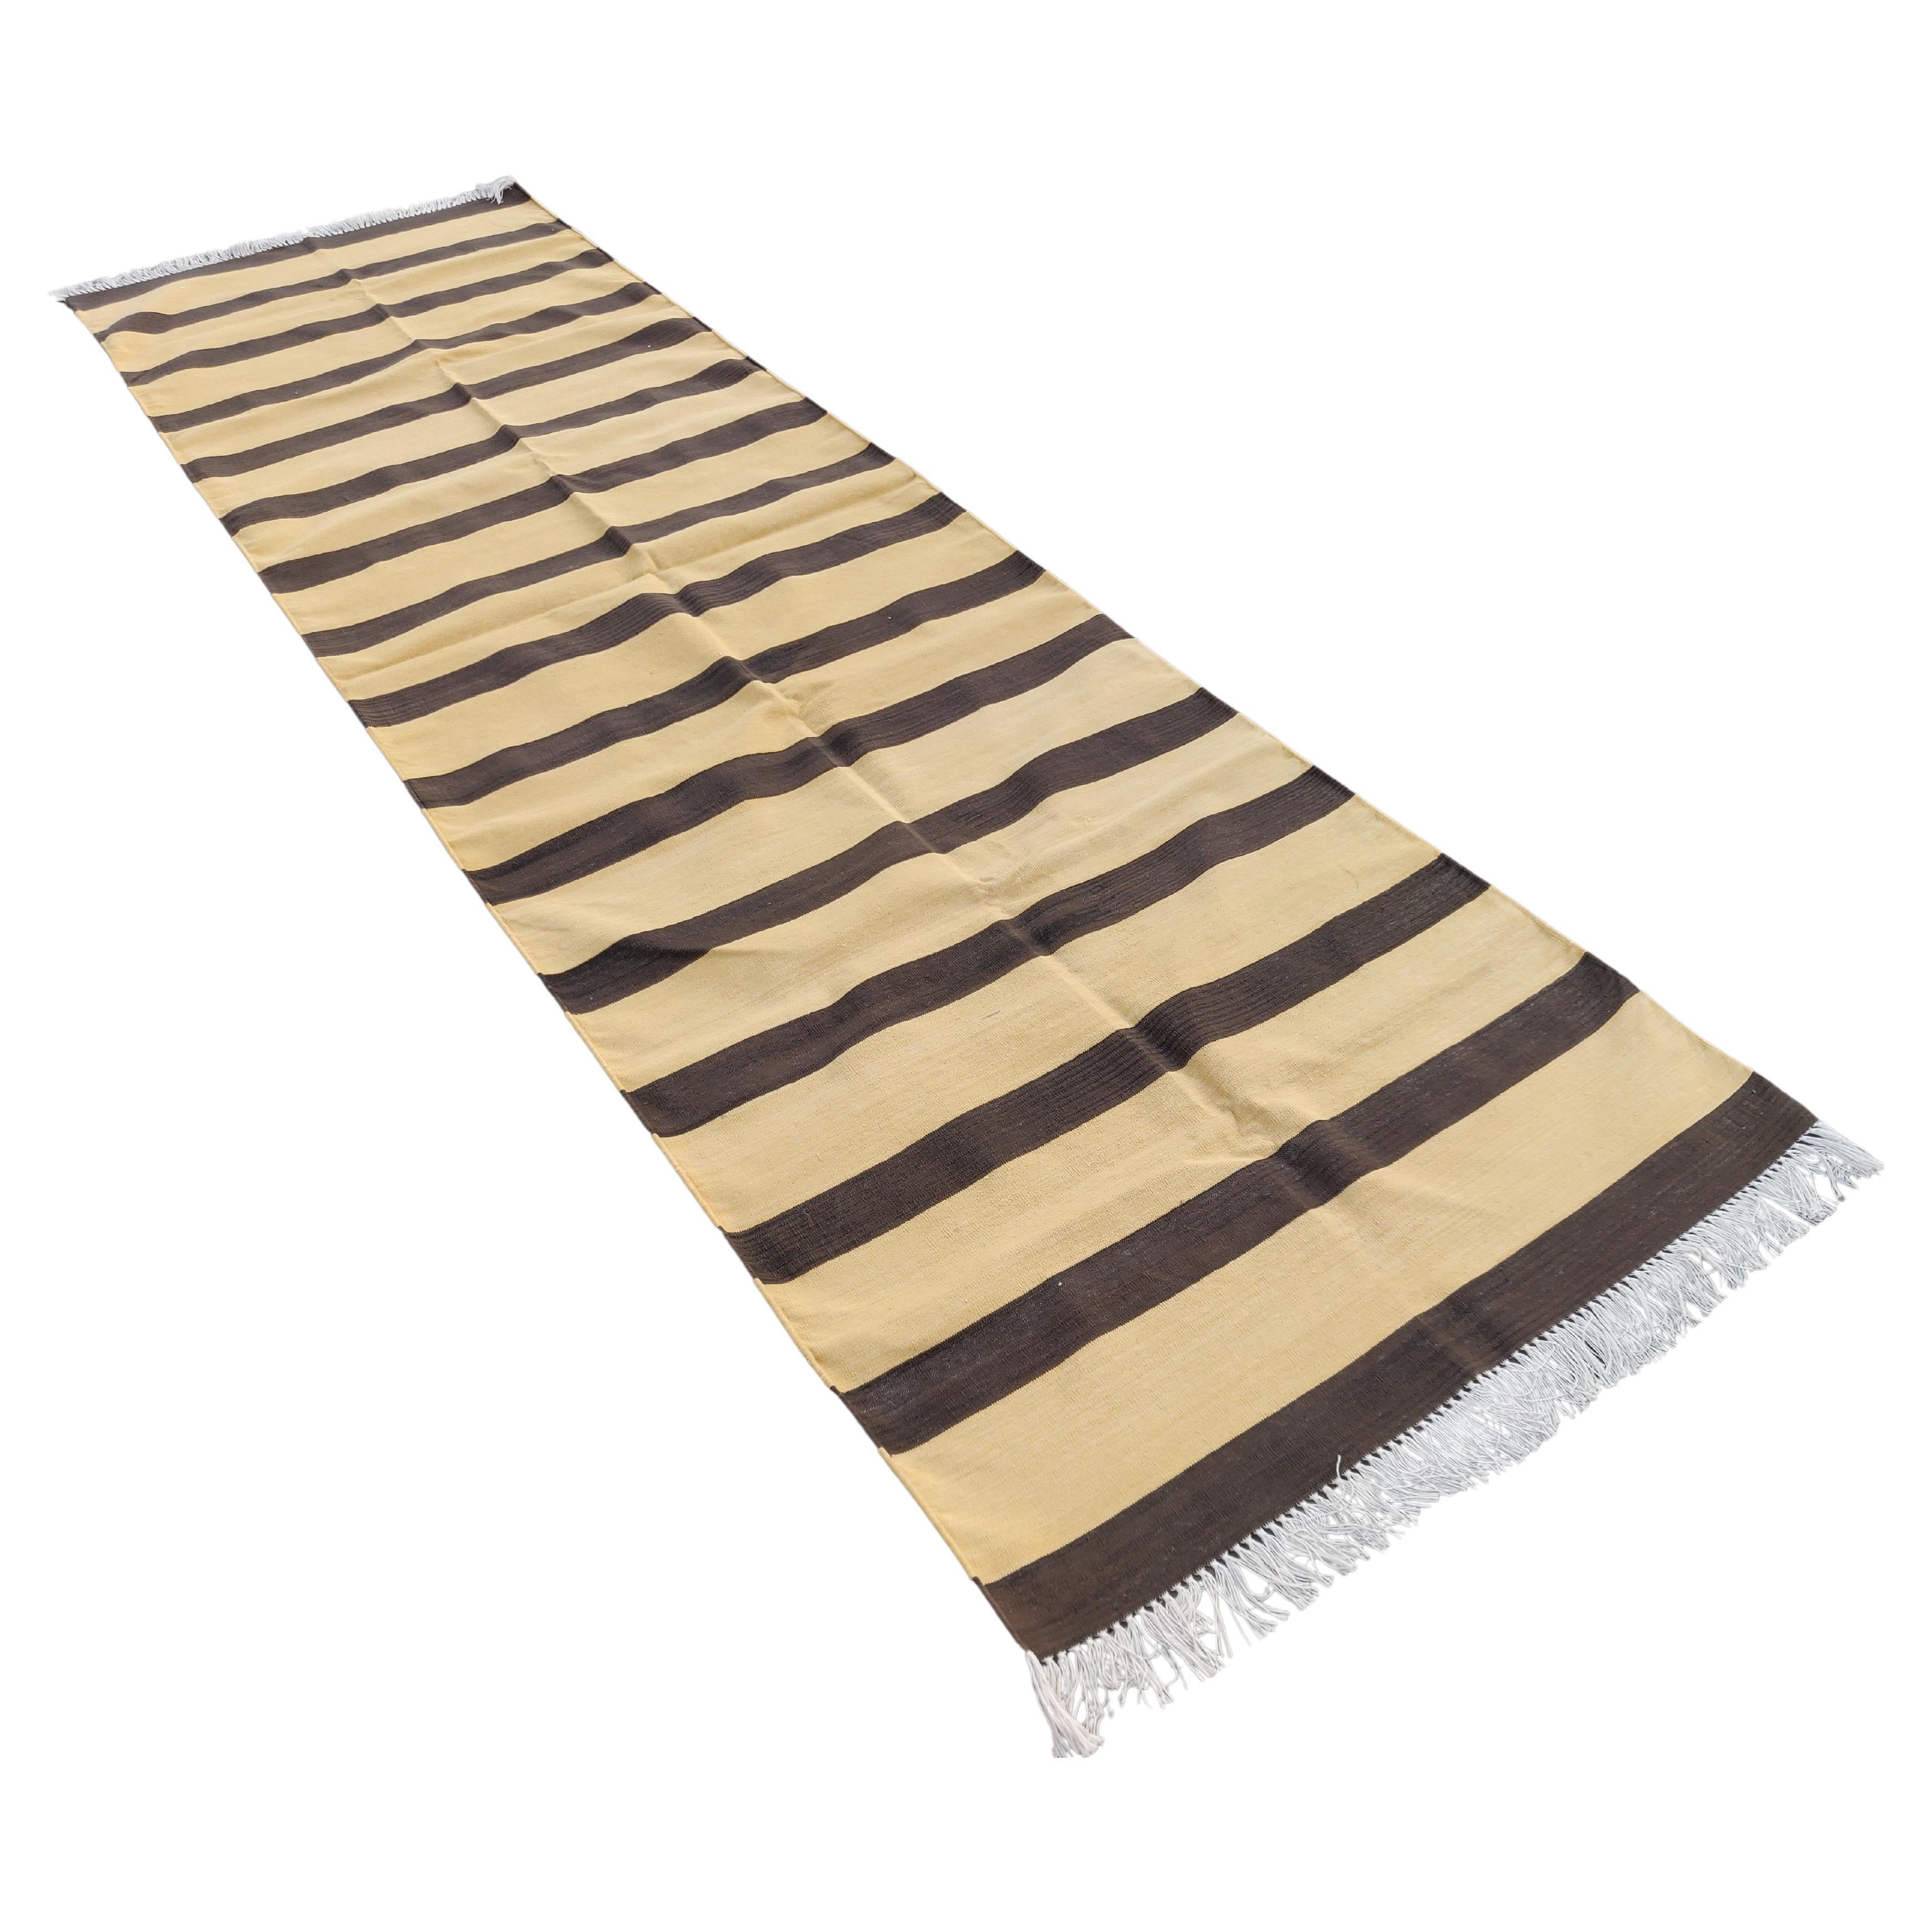 Handmade Cotton Area Flat Weave Runner, 40"x140" Brown Striped Indian Dhurrie For Sale